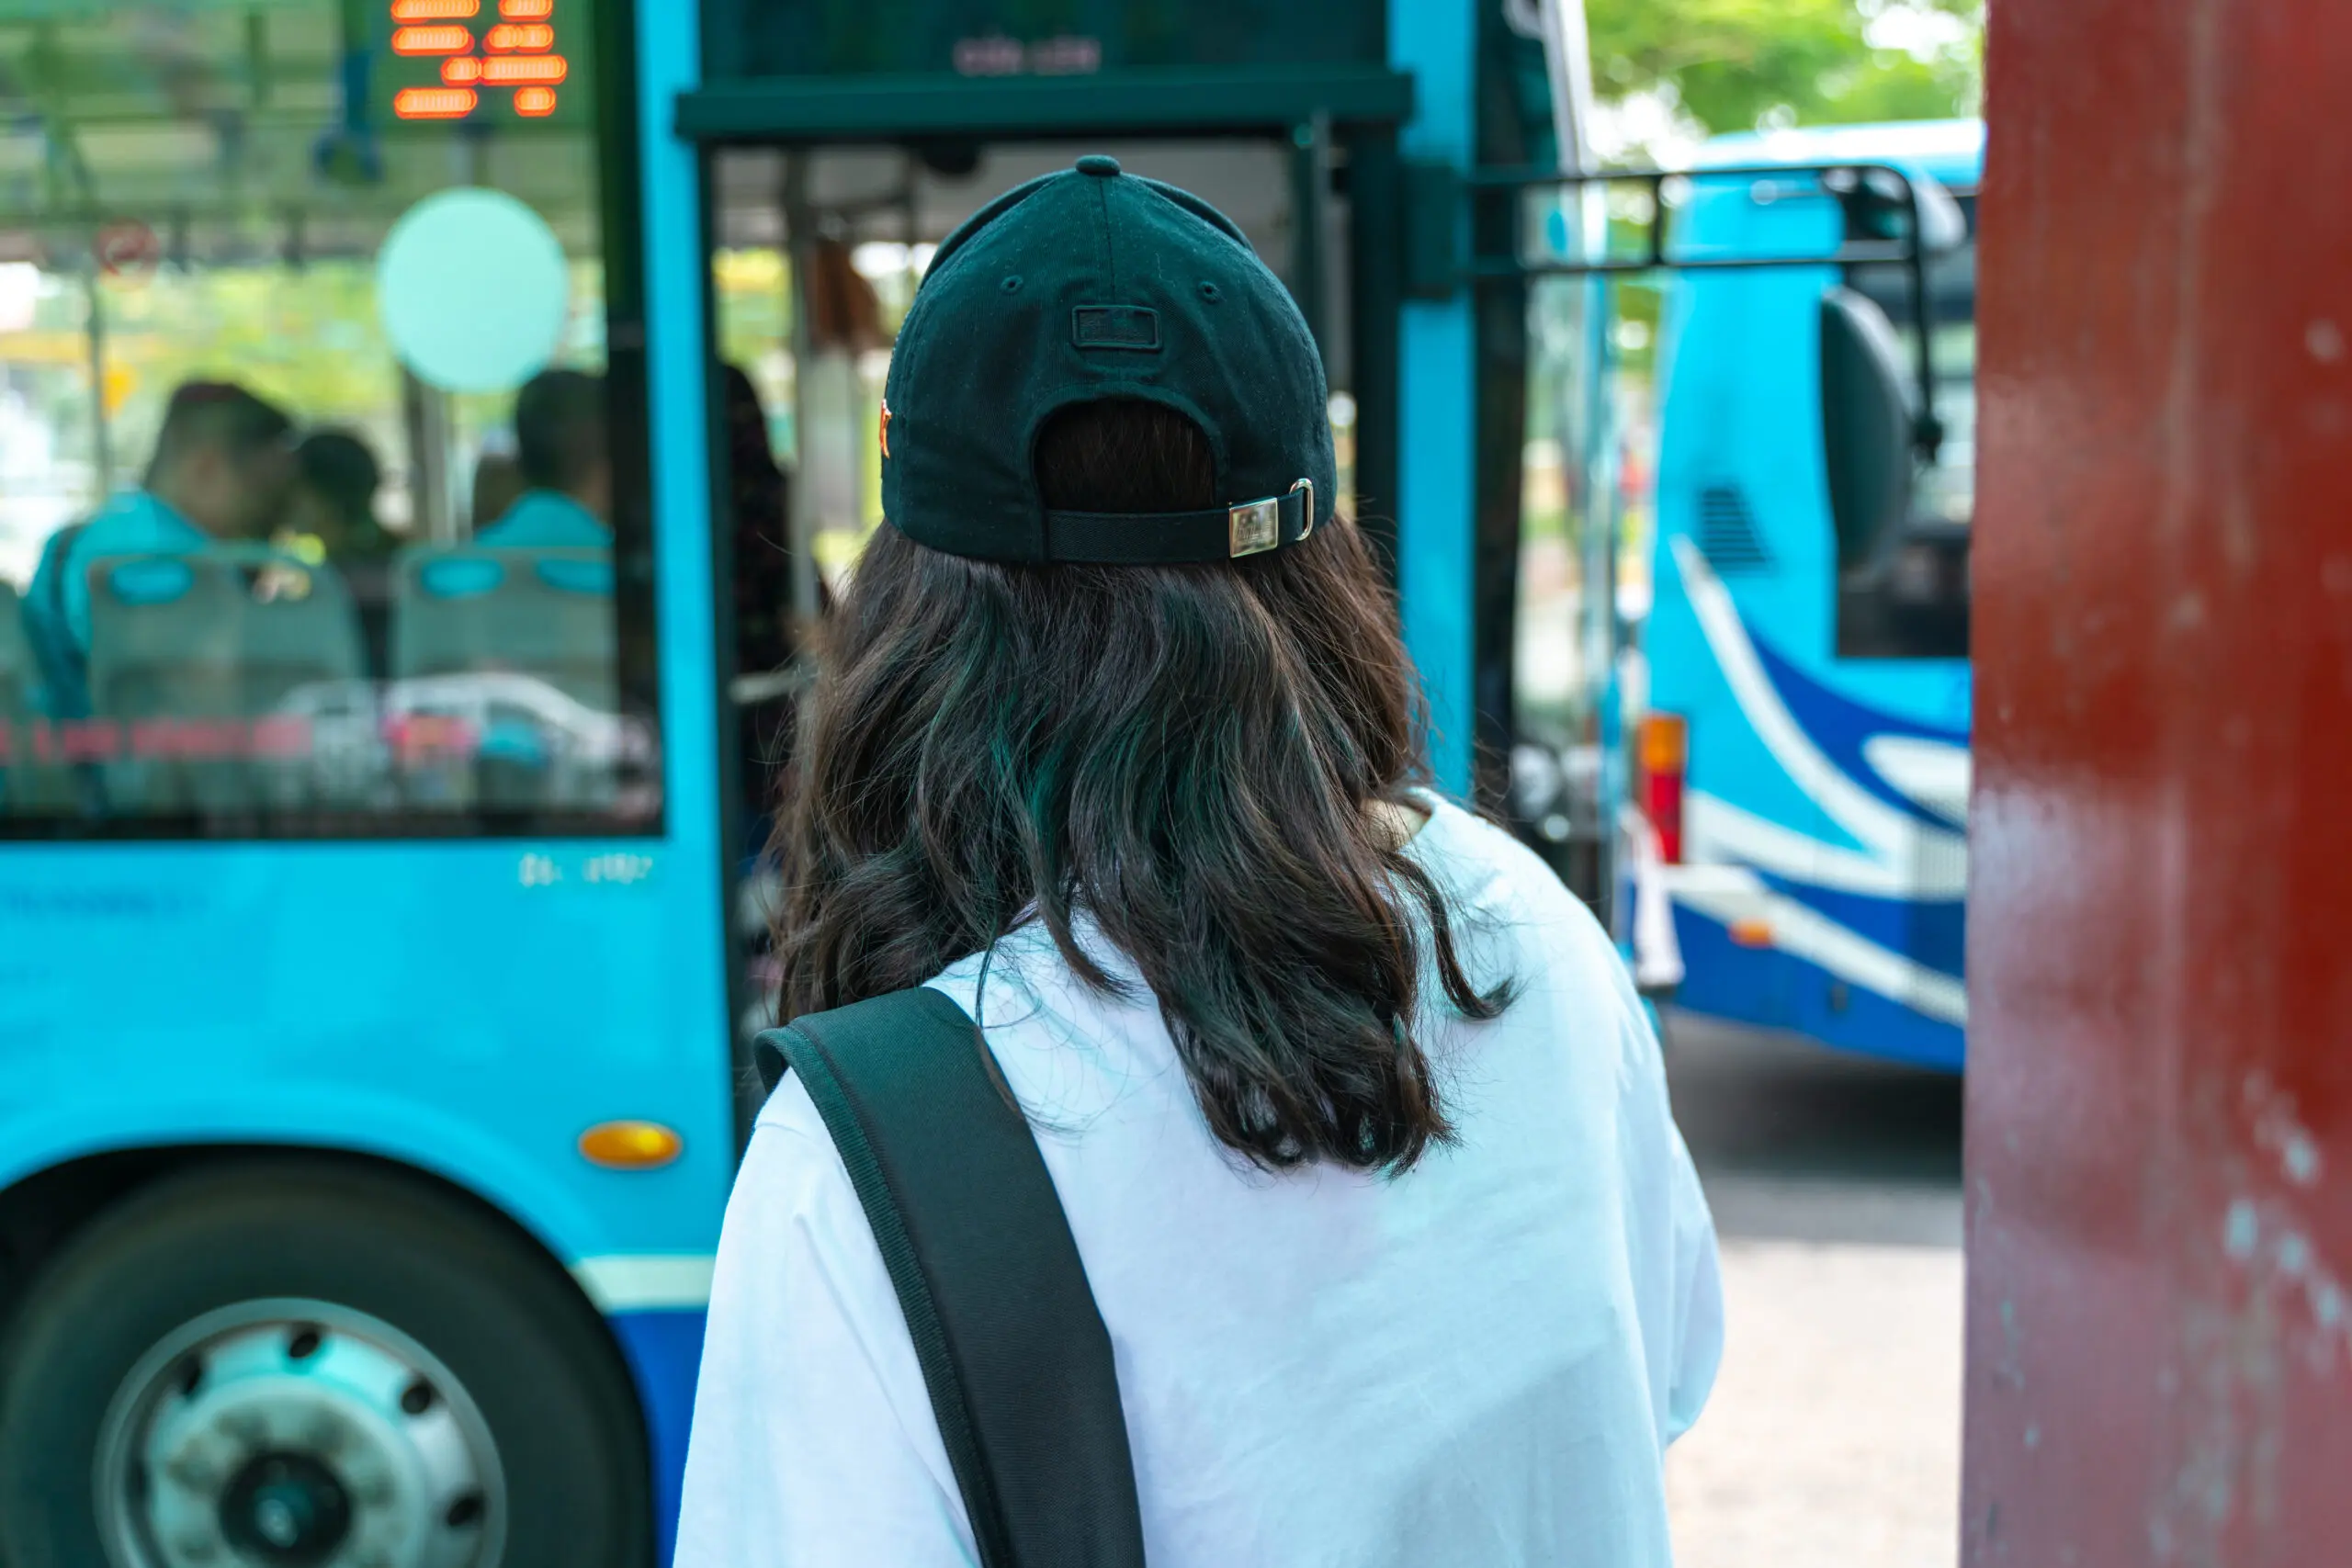 A close up view of a woman standing in front of a bus, facing away from the camera.